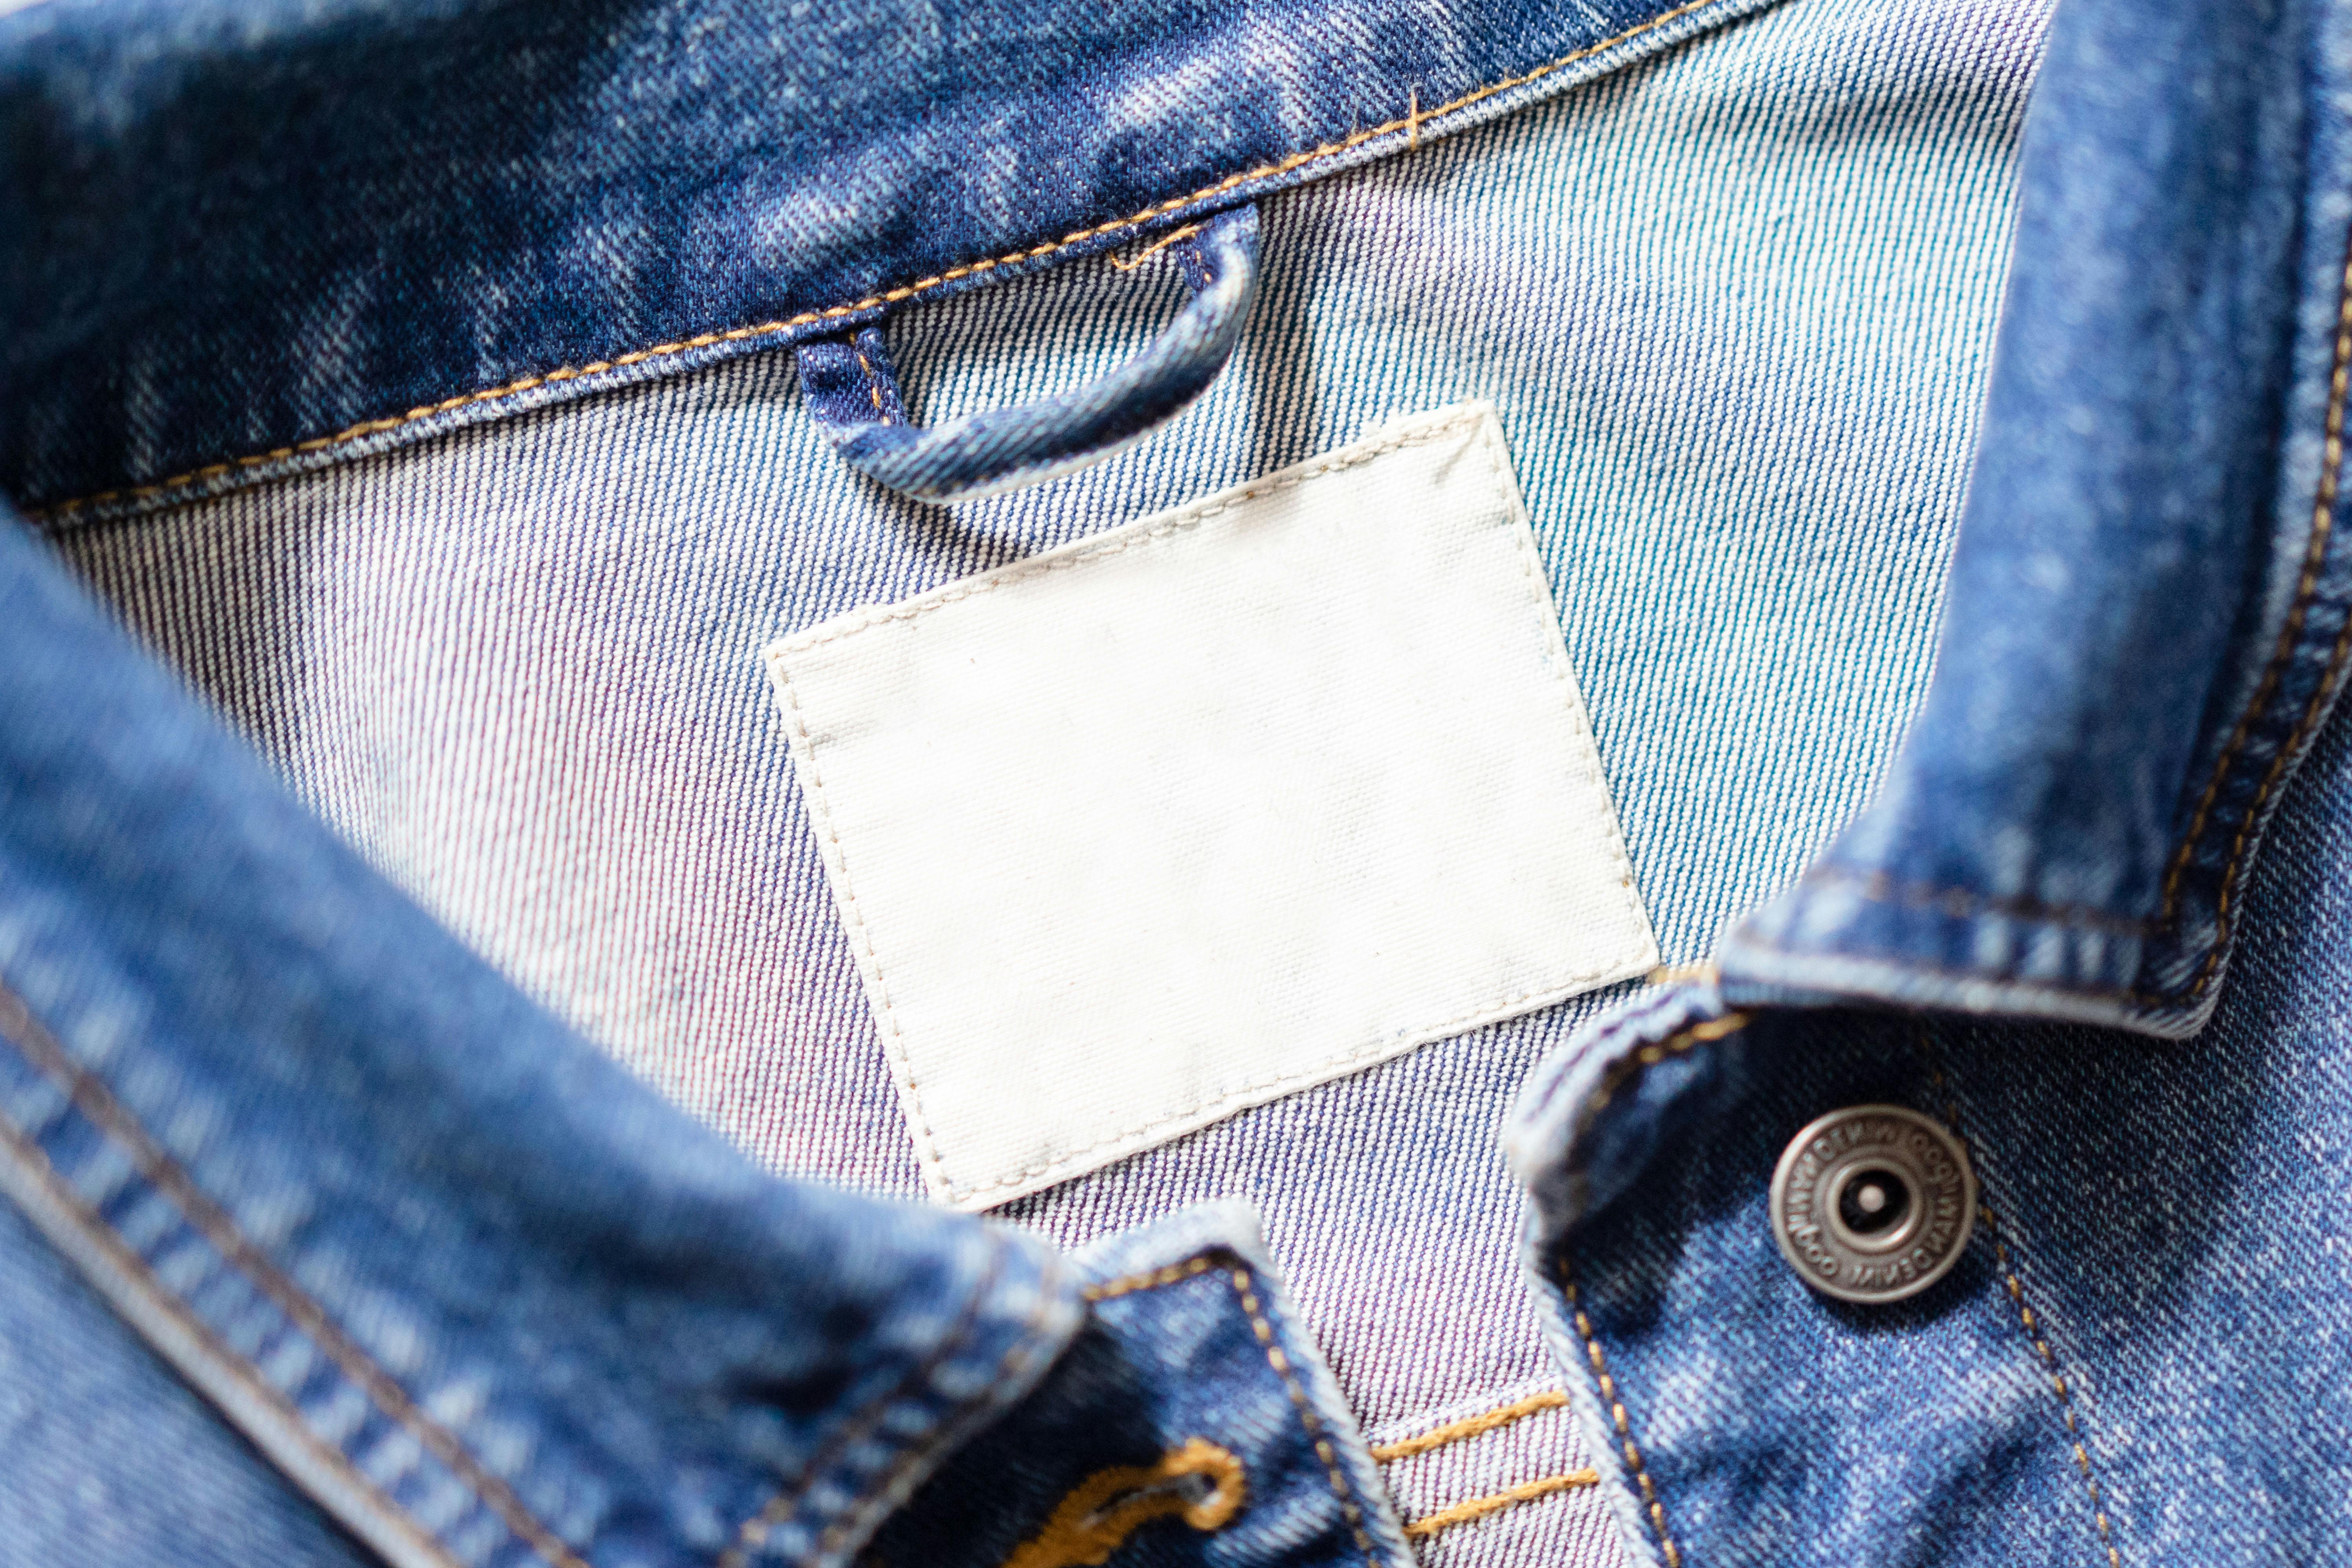 Free Stock Photo of Denim jeans back pocket with stitching